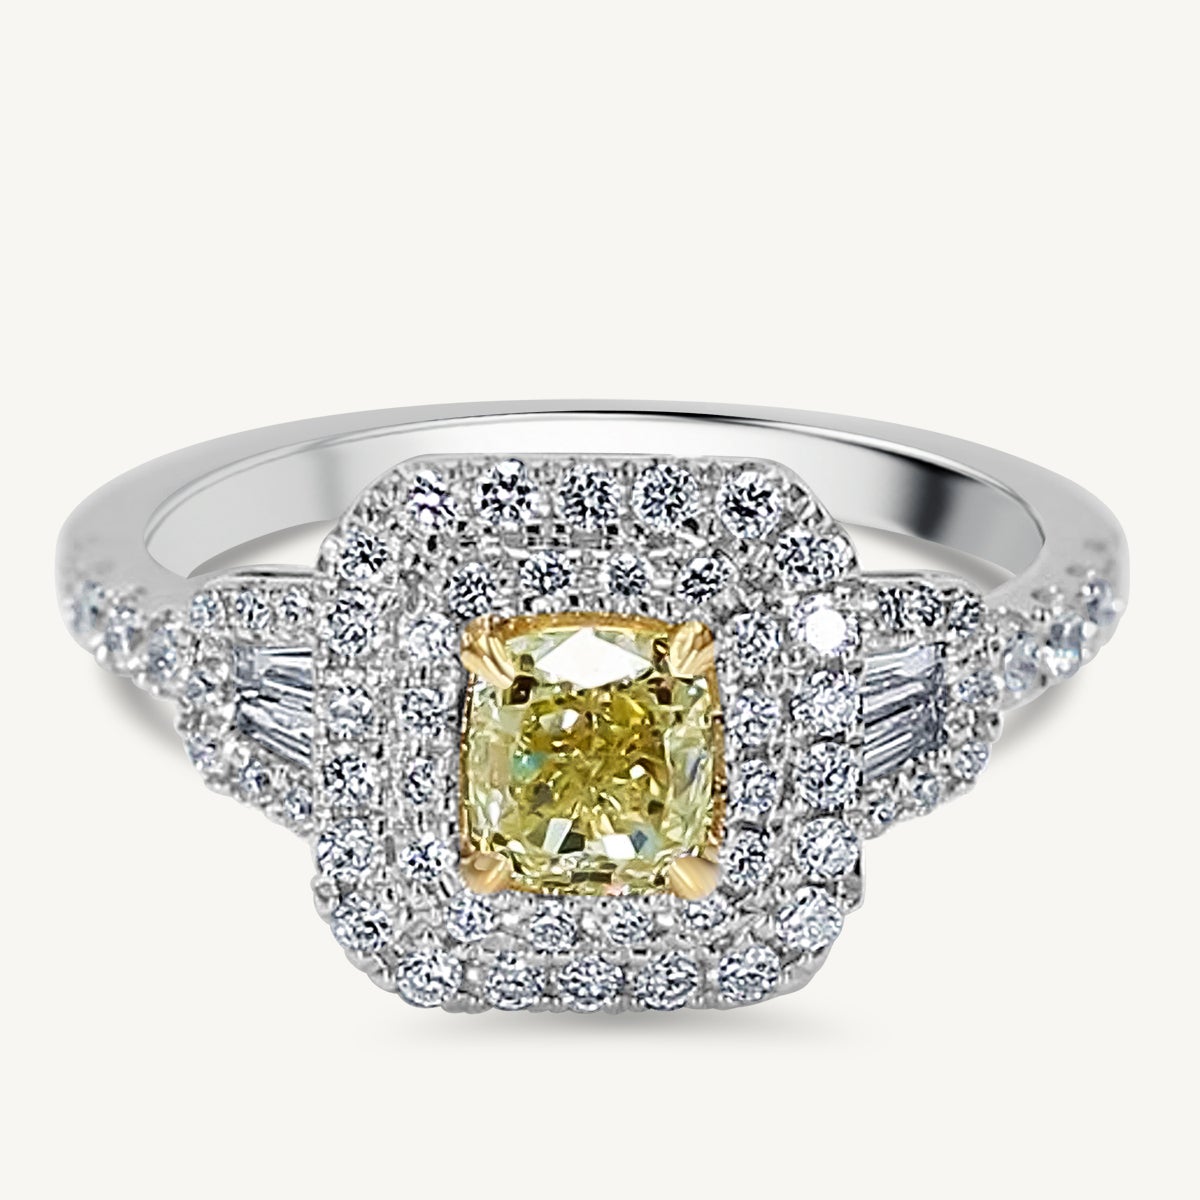 Natural Yellow Cushion and White Diamond 1.20 Carat TW Gold Cocktail Ring